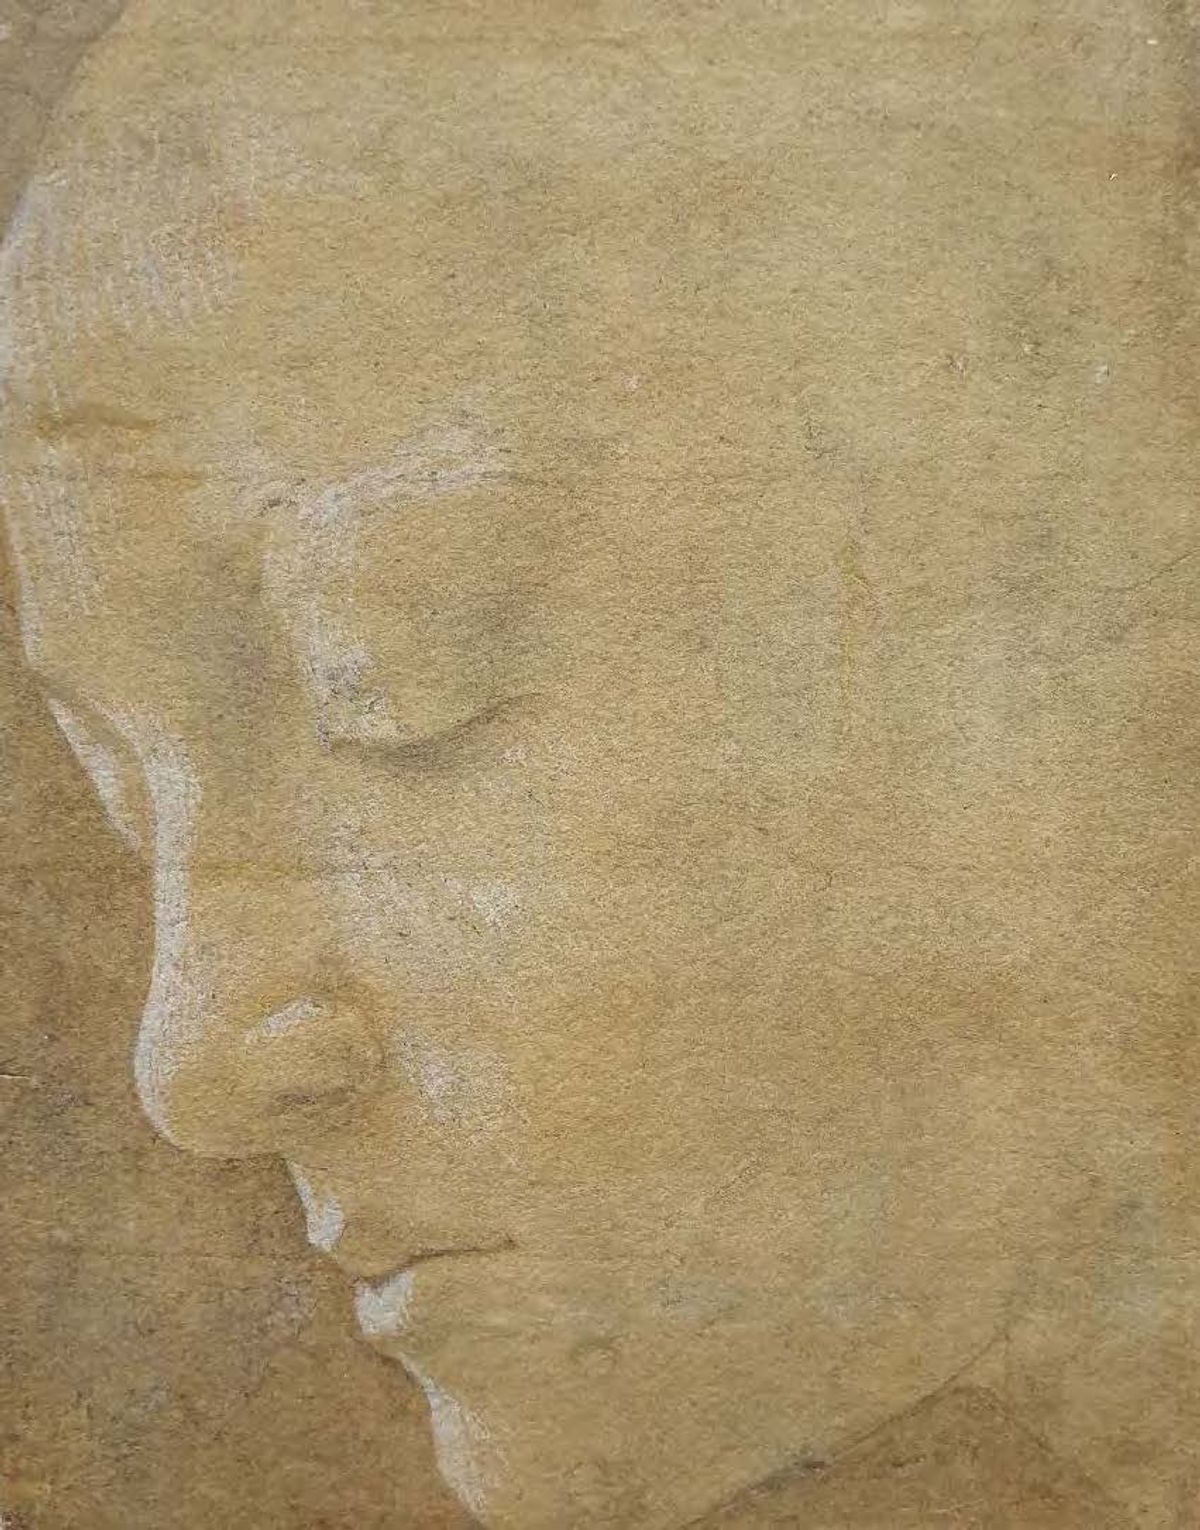 One of the works curator Furio Rinaldi recently attributed to Botticelli, Head of a woman looking down to the left, 1468-70 Christ Church Picture Gallery, Oxford, UK